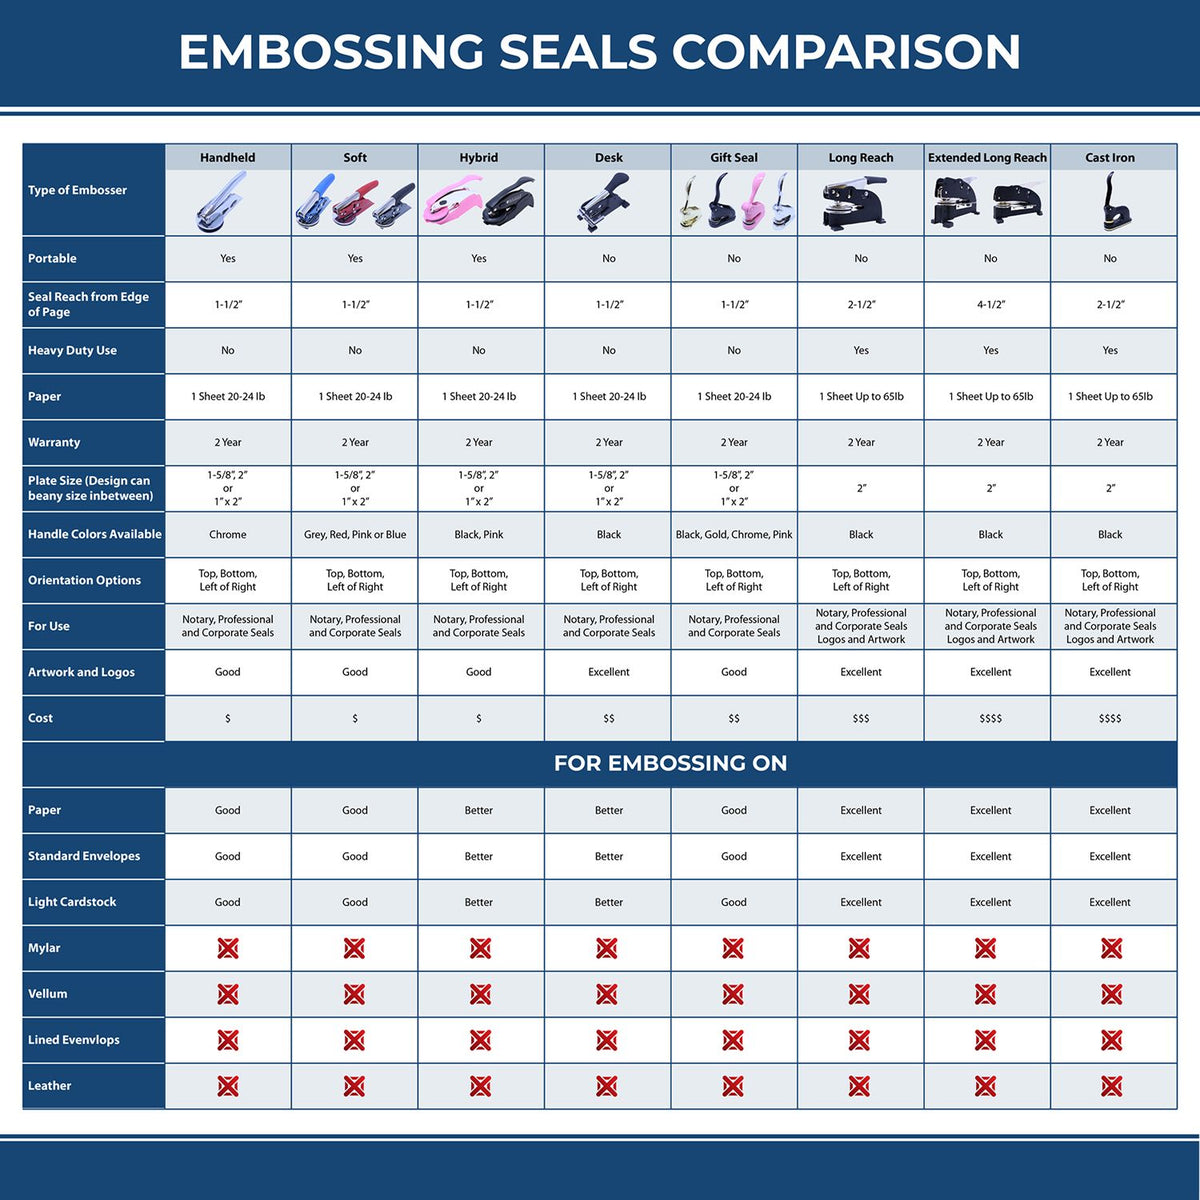 A comparison chart for the different types of mount models available for the Soft Ohio Professional Engineer Seal.